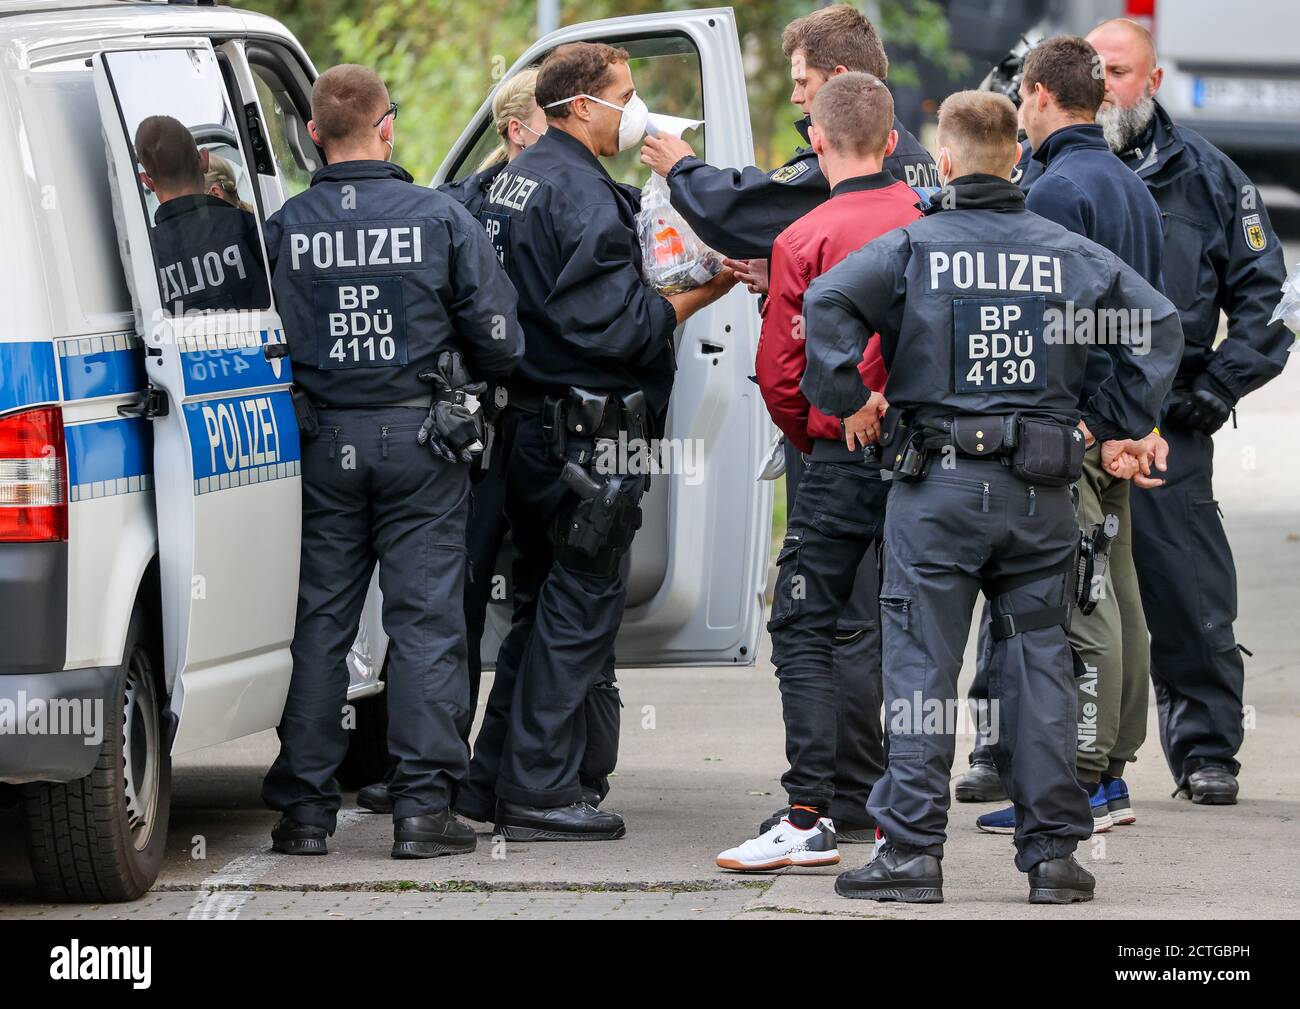 23 September 2020, Saxony-Anhalt, Weißenfels: Two suspects are taken away  by federal police officers after a raid to establish their identities. On  Wednesday, federal police searched more than 60 residential and business